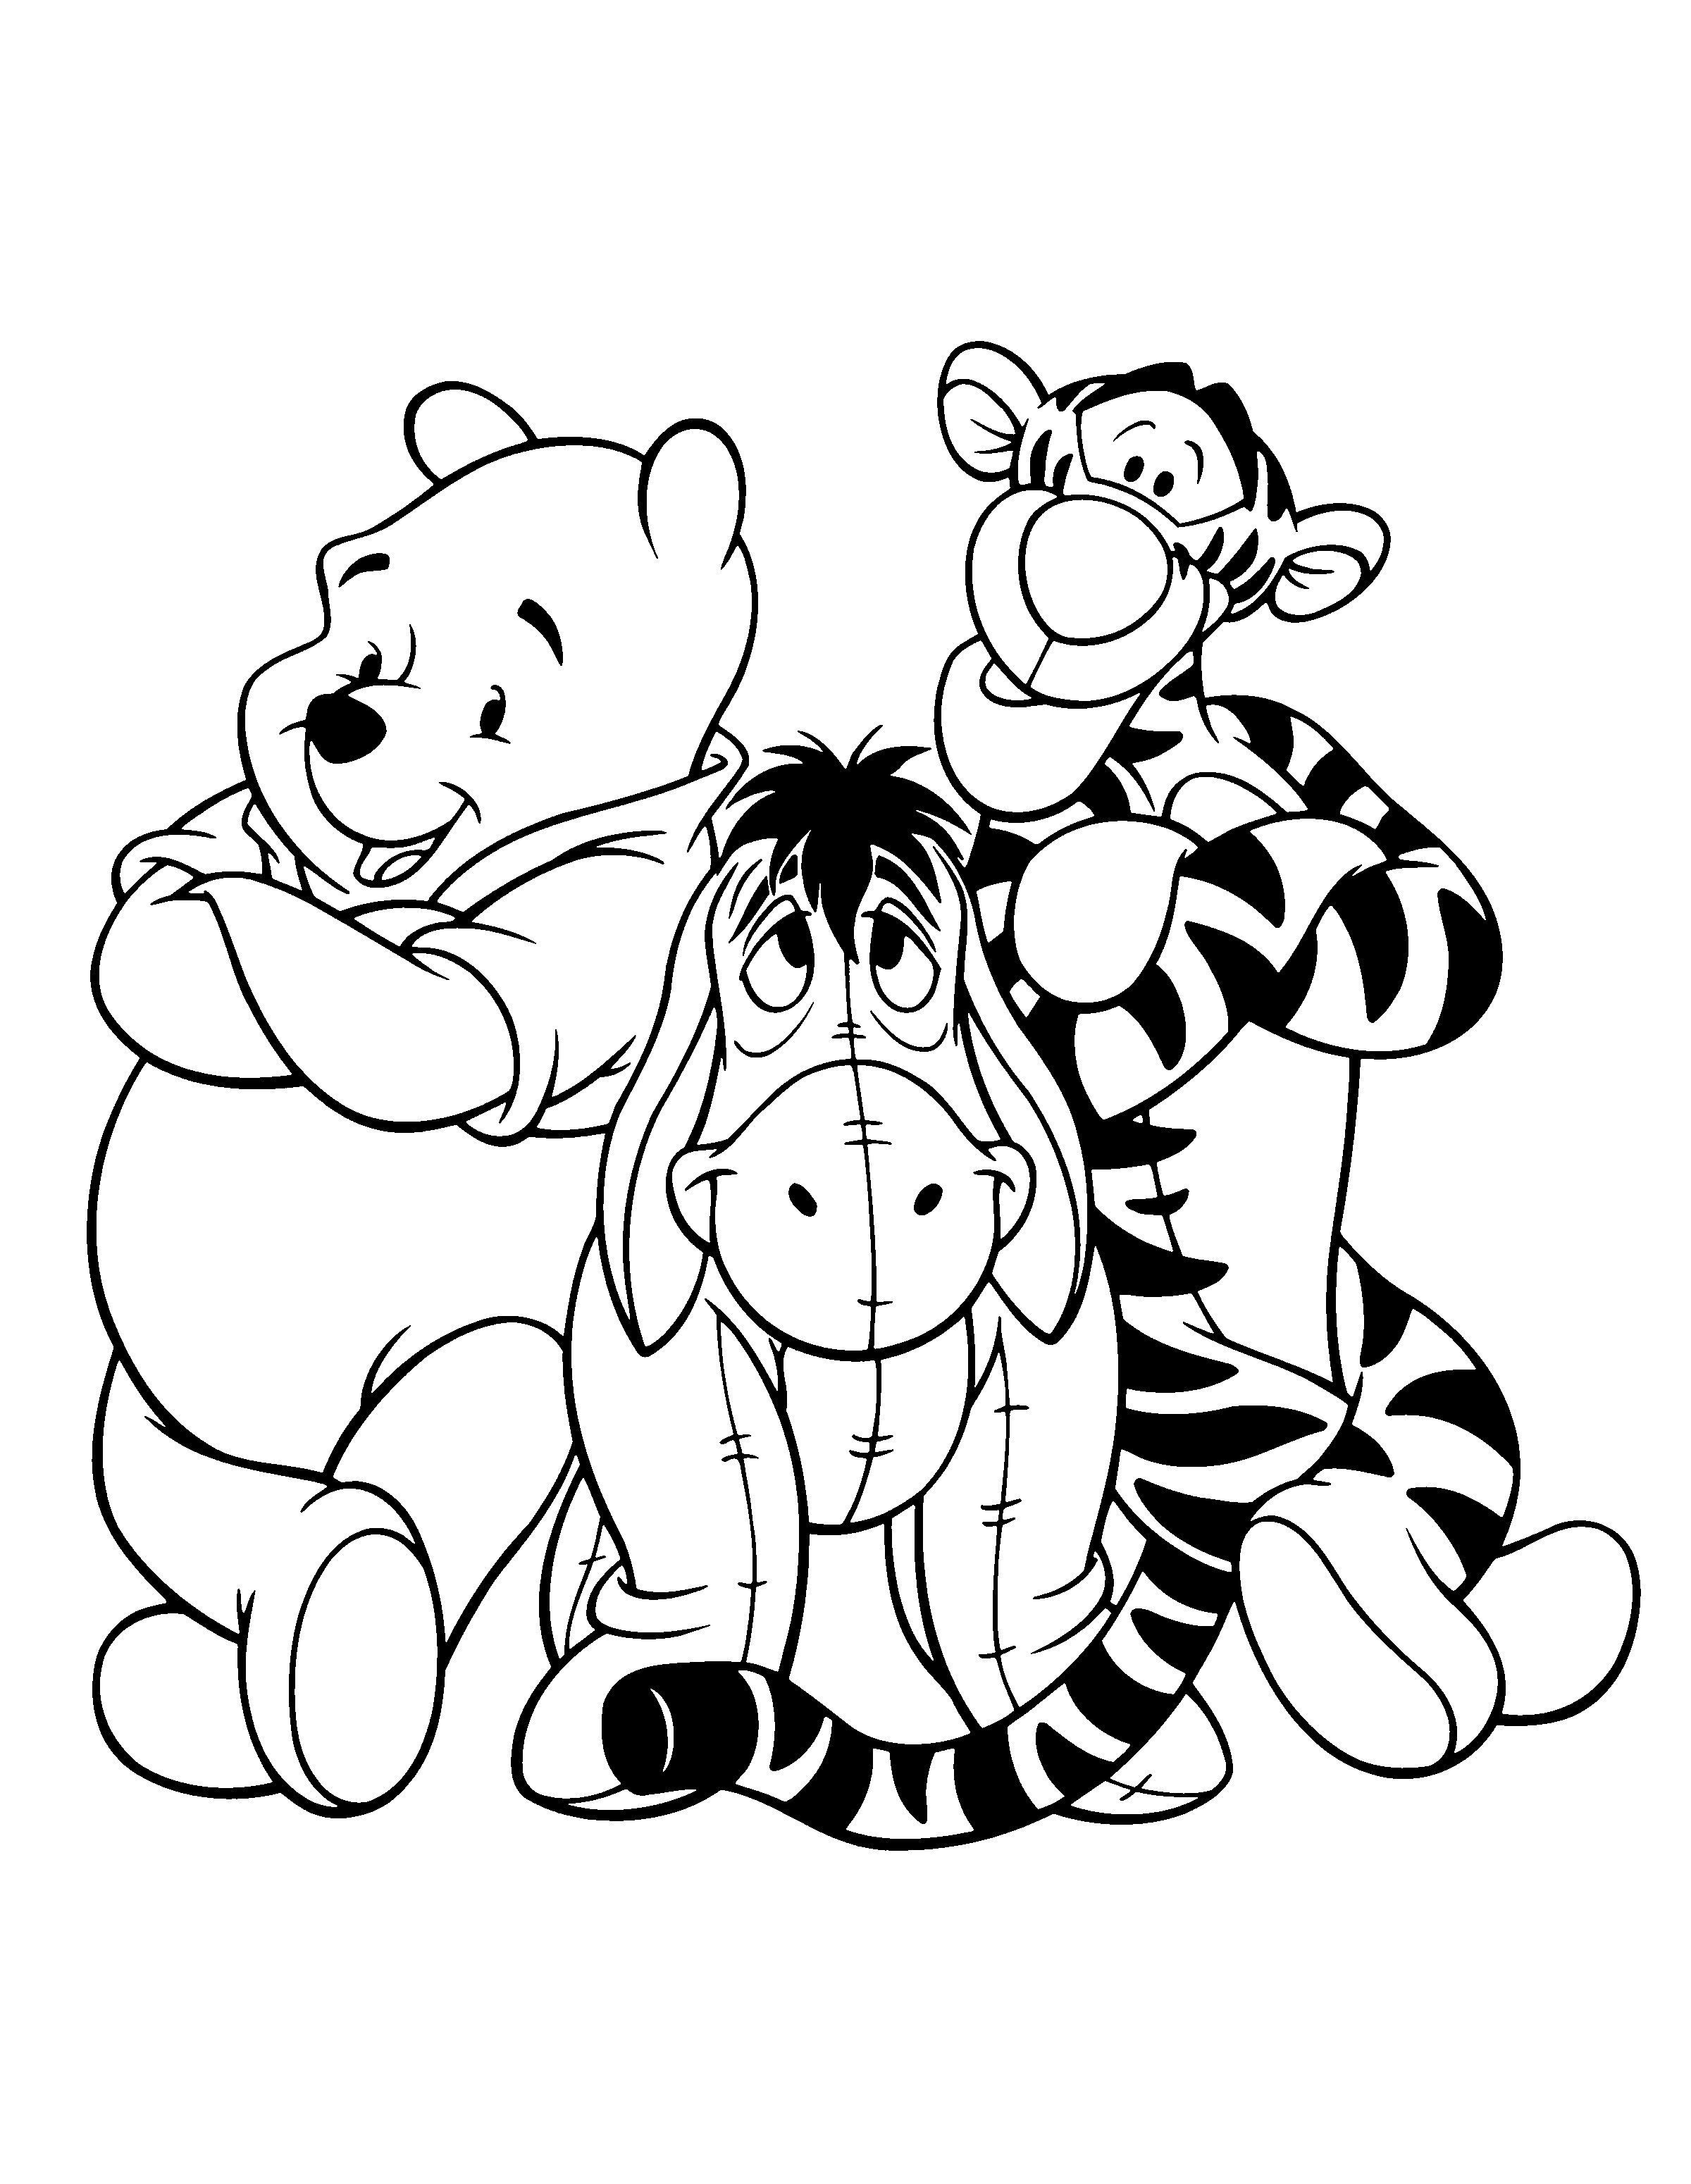 Coloring Book Pages Winnie The Pooh
 Winnie The Pooh Coloring Pages Adult Coloring Books